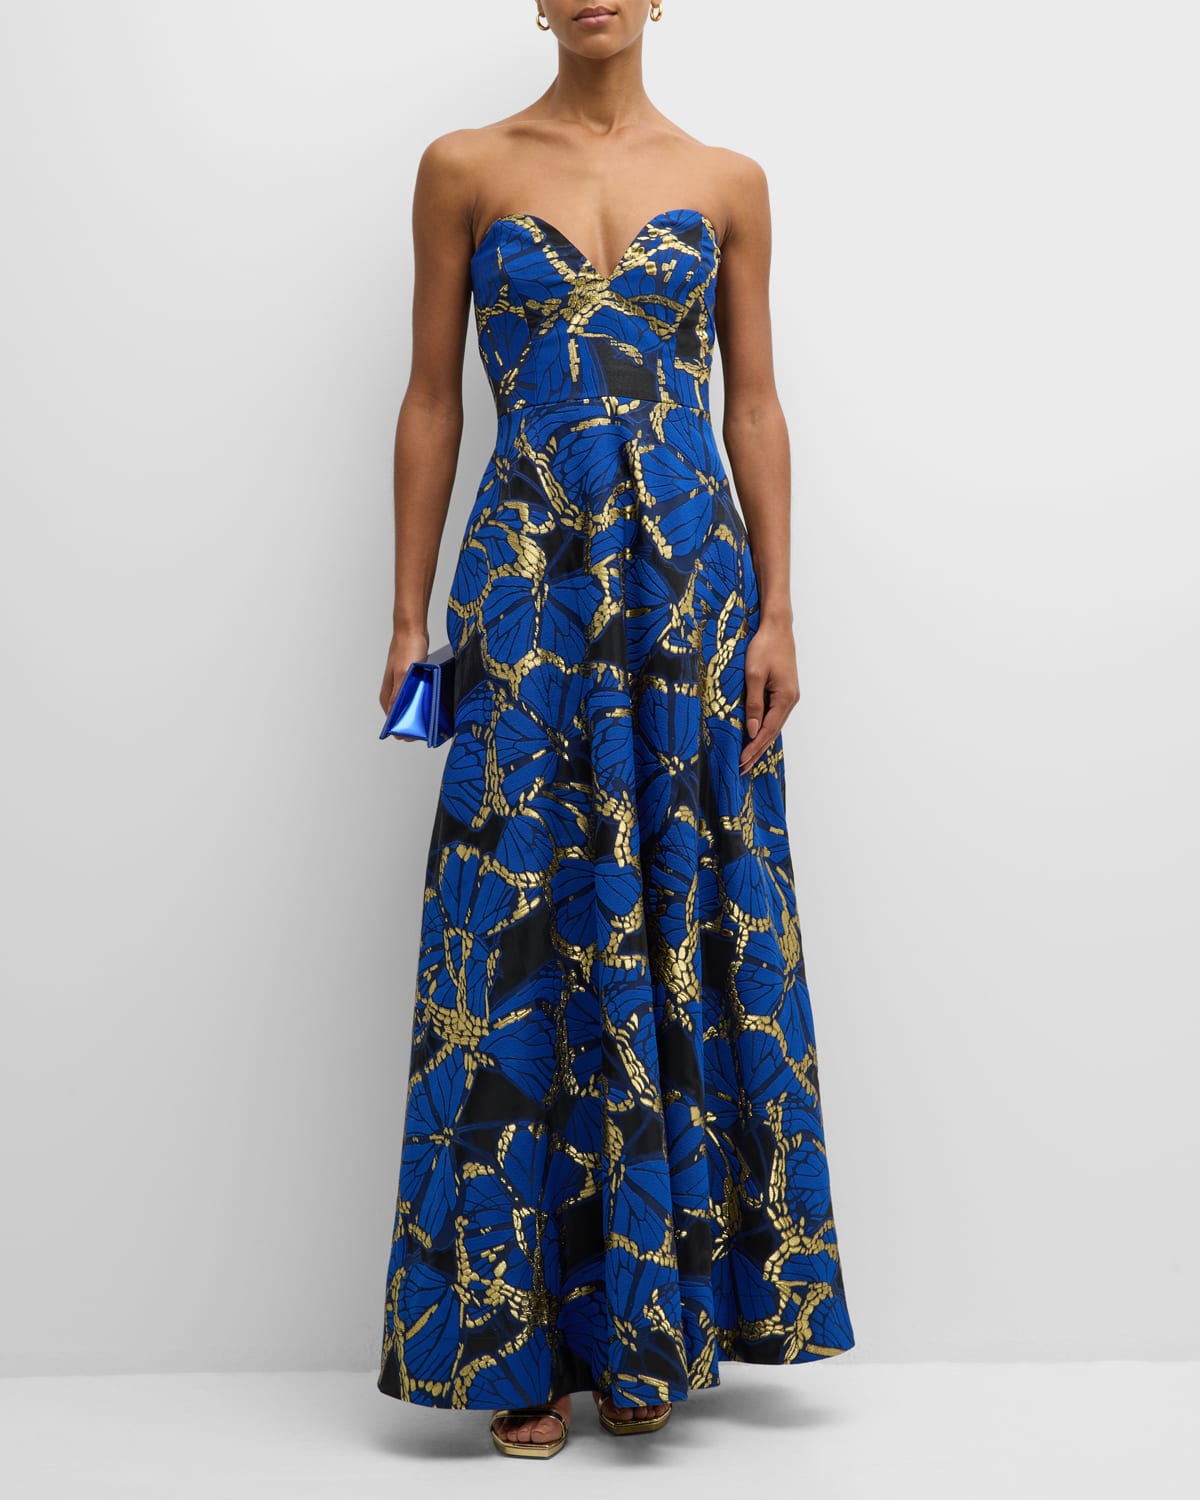 Milly Roxy Strapless A-line Metallic Jacquard Gown In Blue Multi